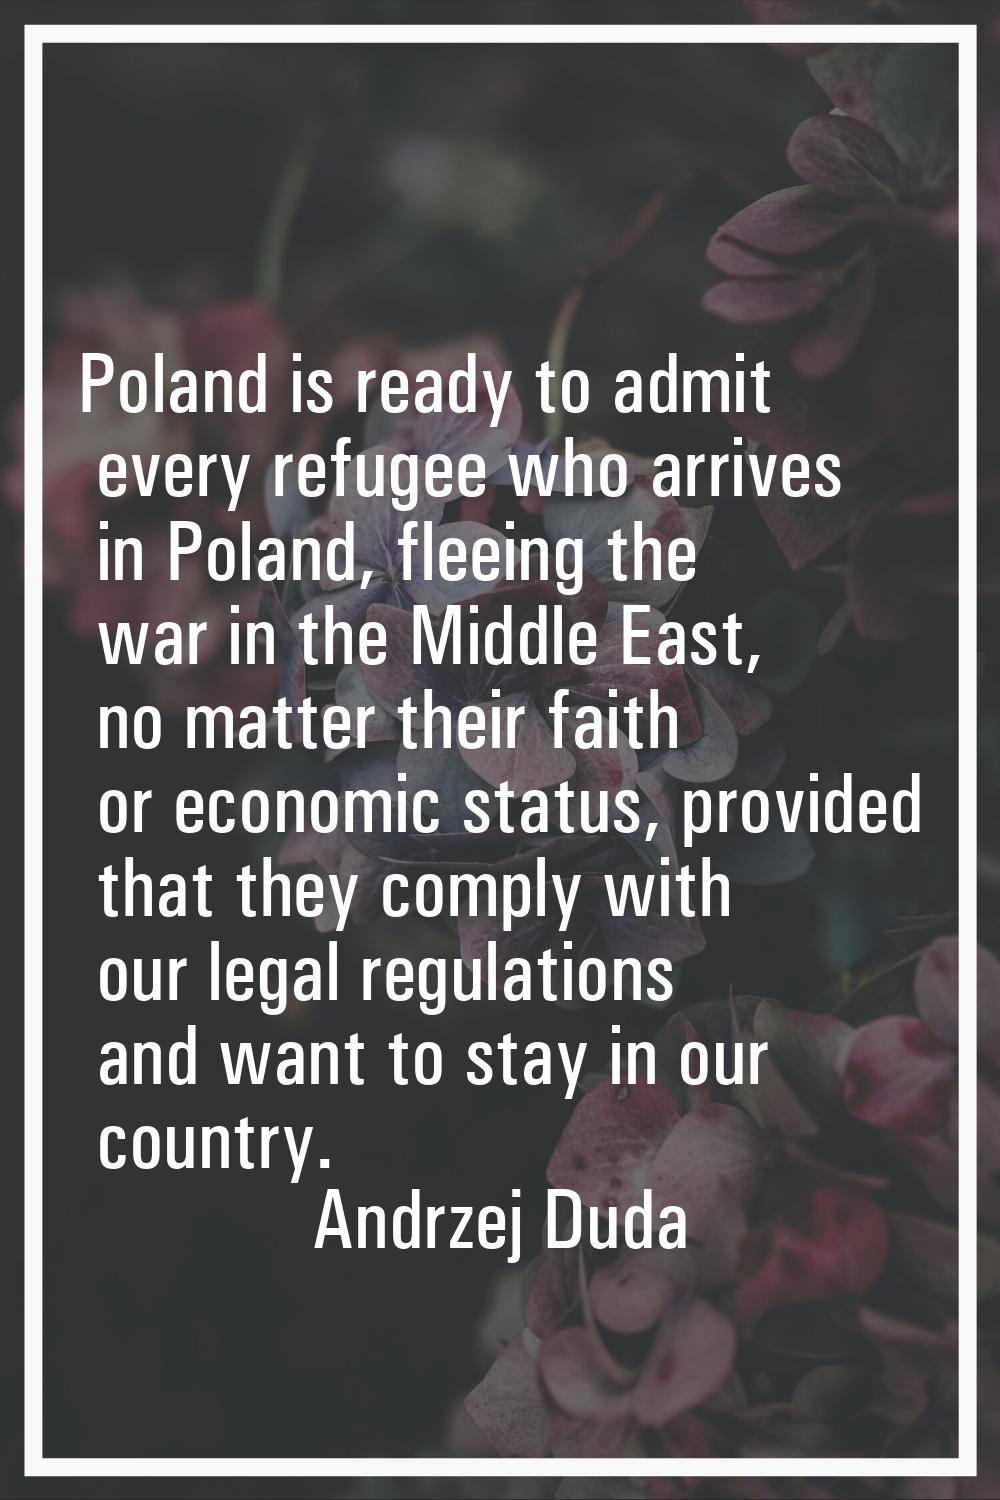 Poland is ready to admit every refugee who arrives in Poland, fleeing the war in the Middle East, n